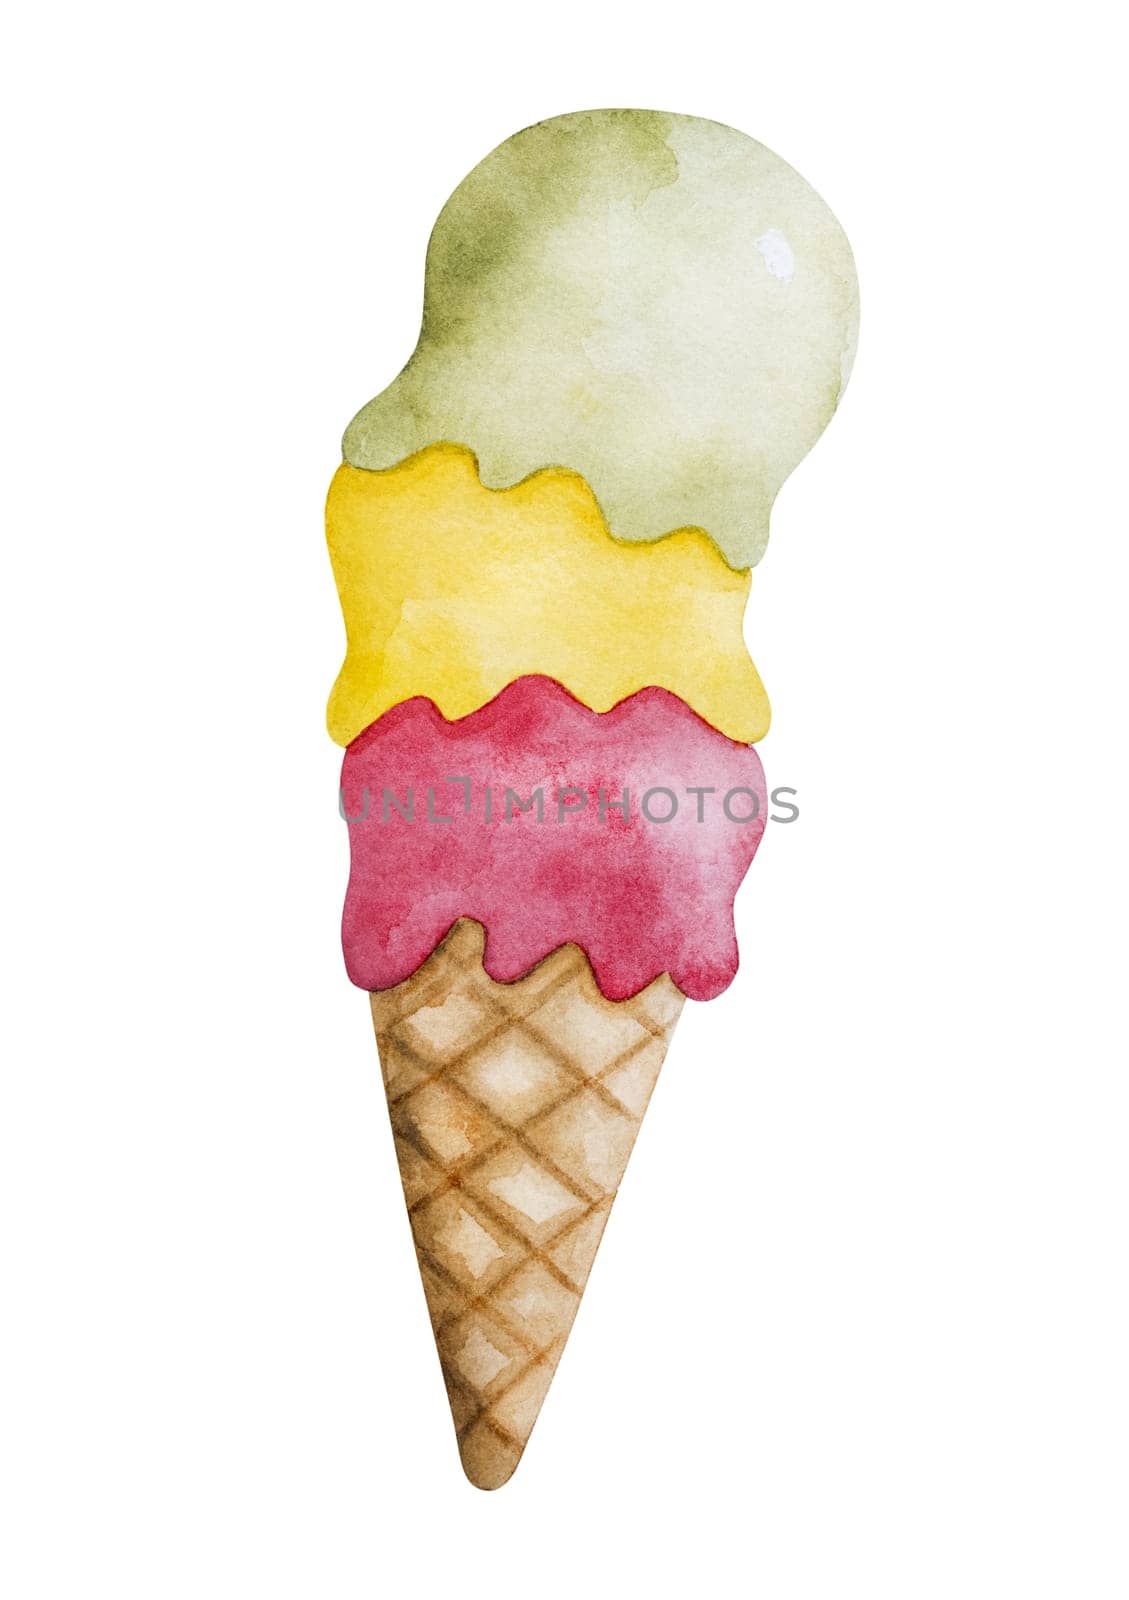 Hand-Painted Watercolor Of A Three-Color Ice Cream In A Cup by tan4ikk1